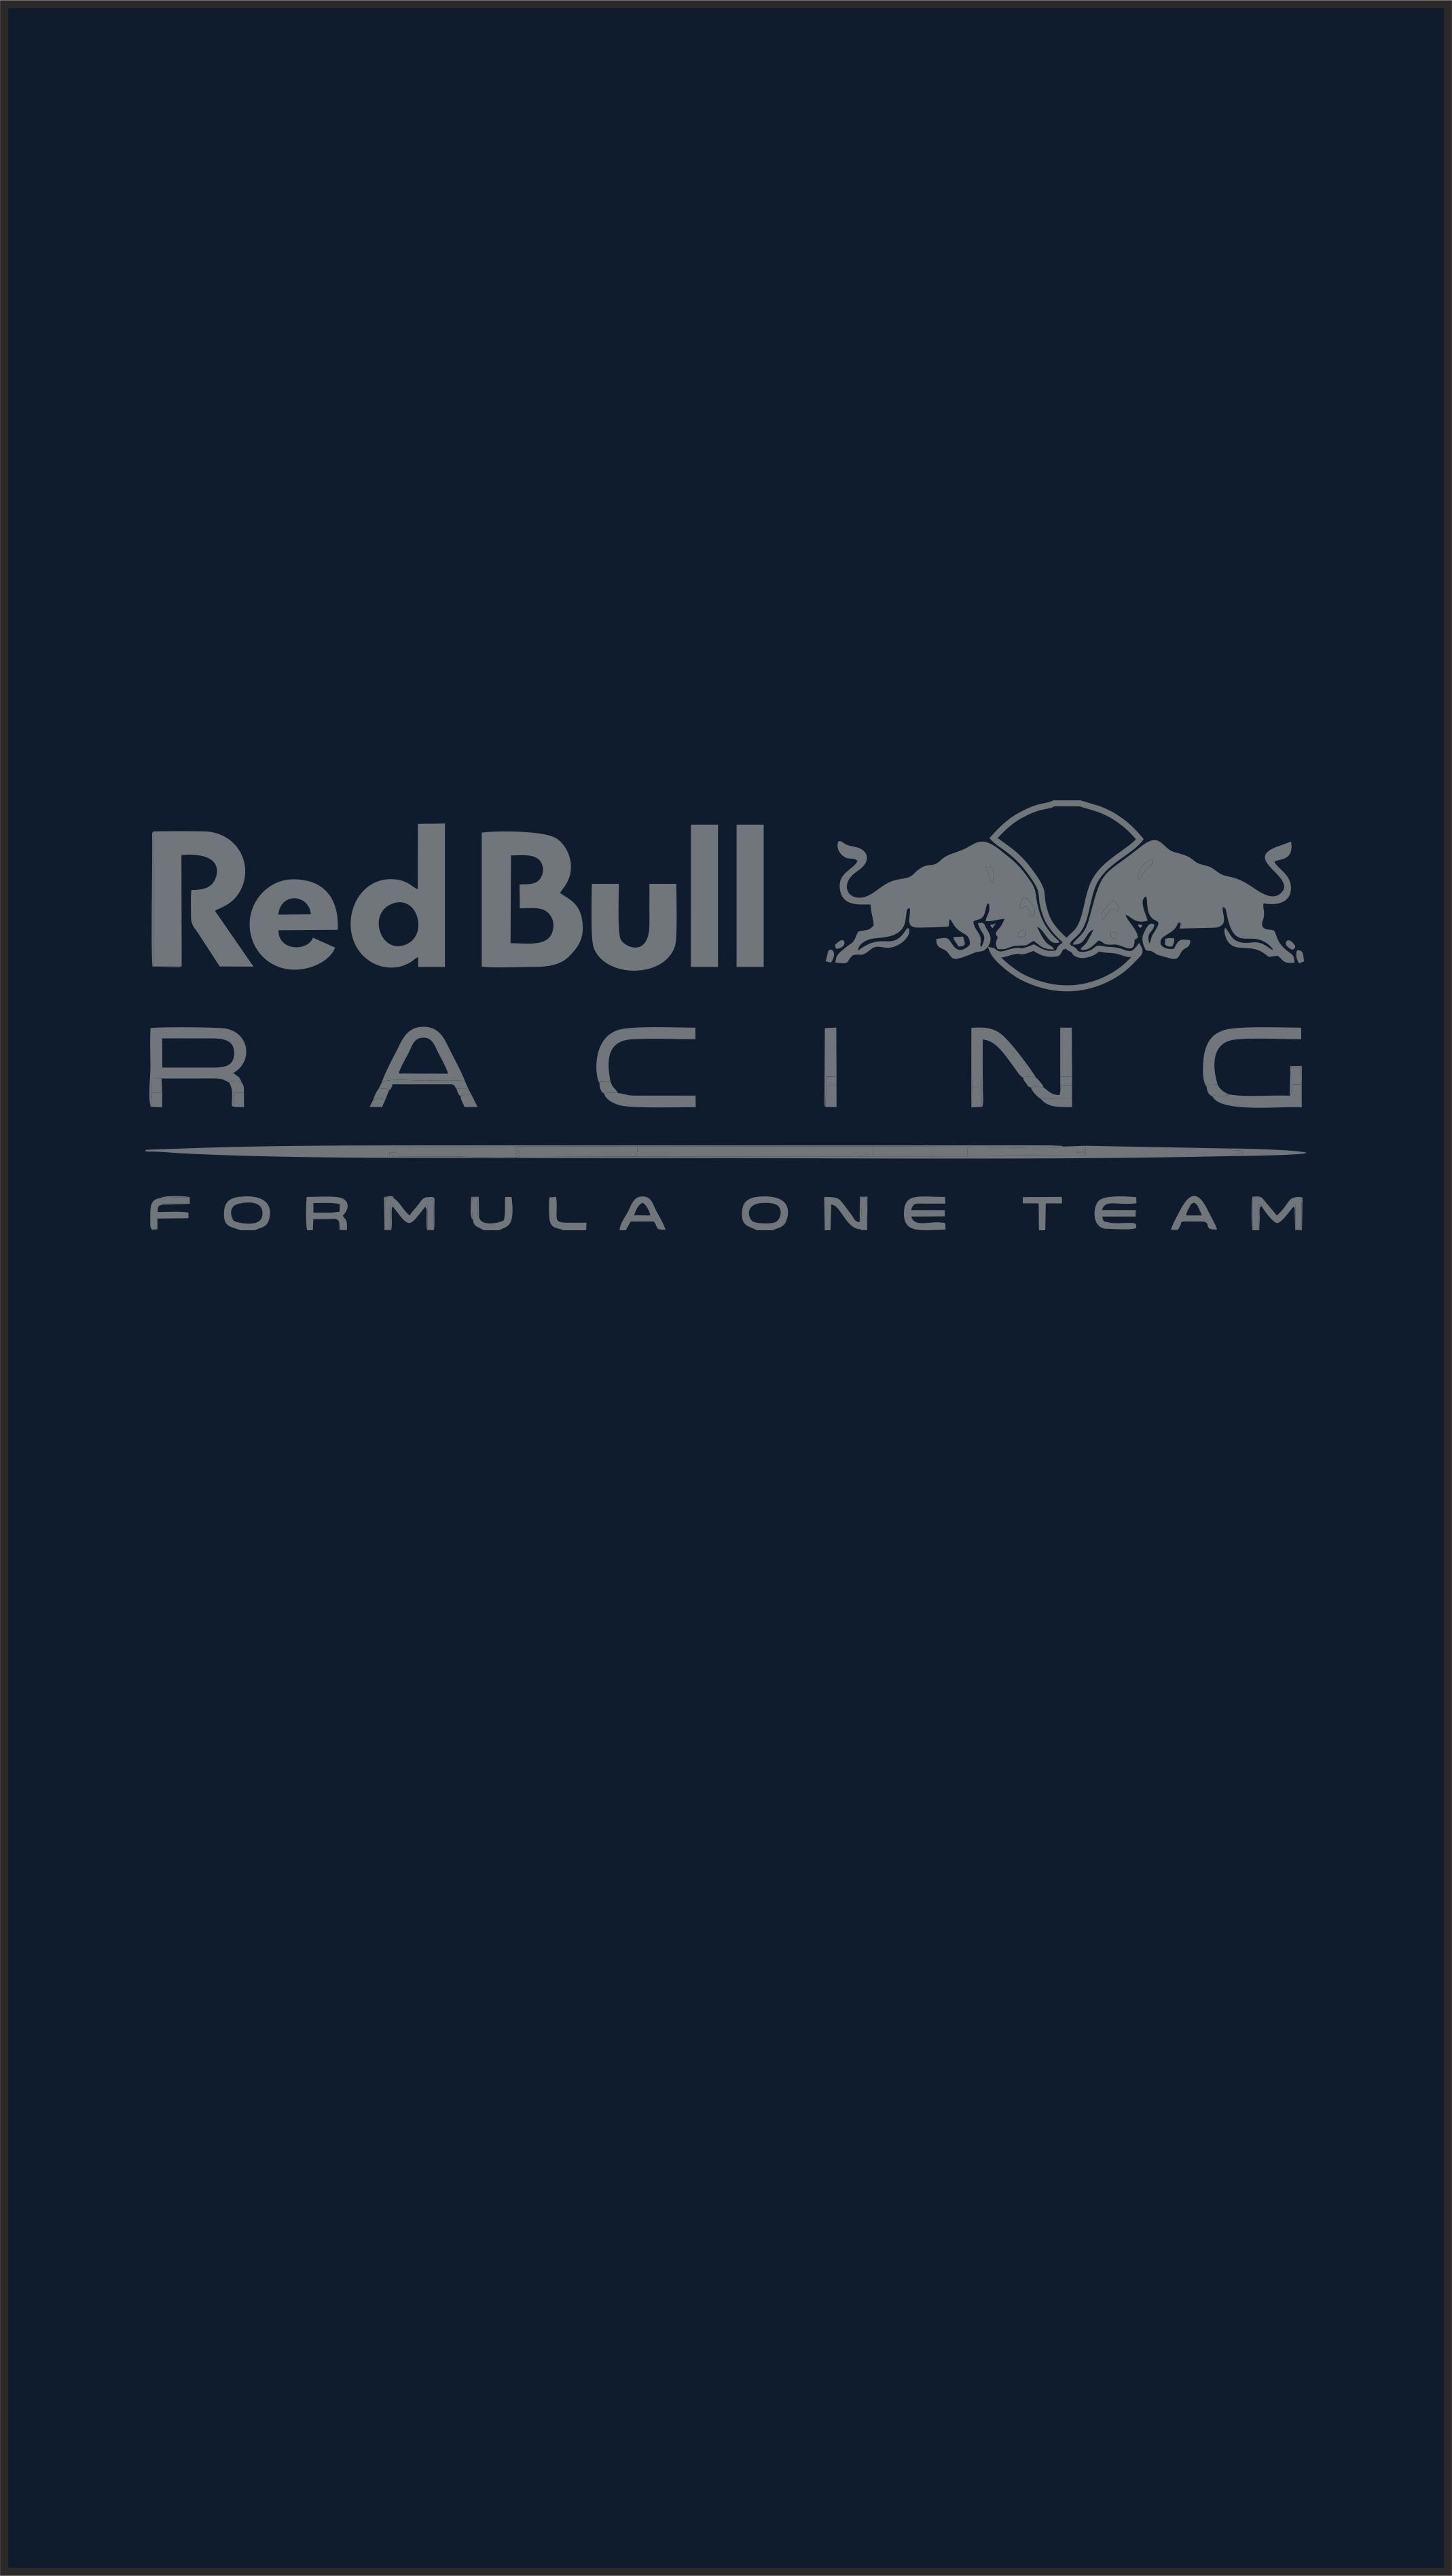 image about Red Bull Logos Monster energy